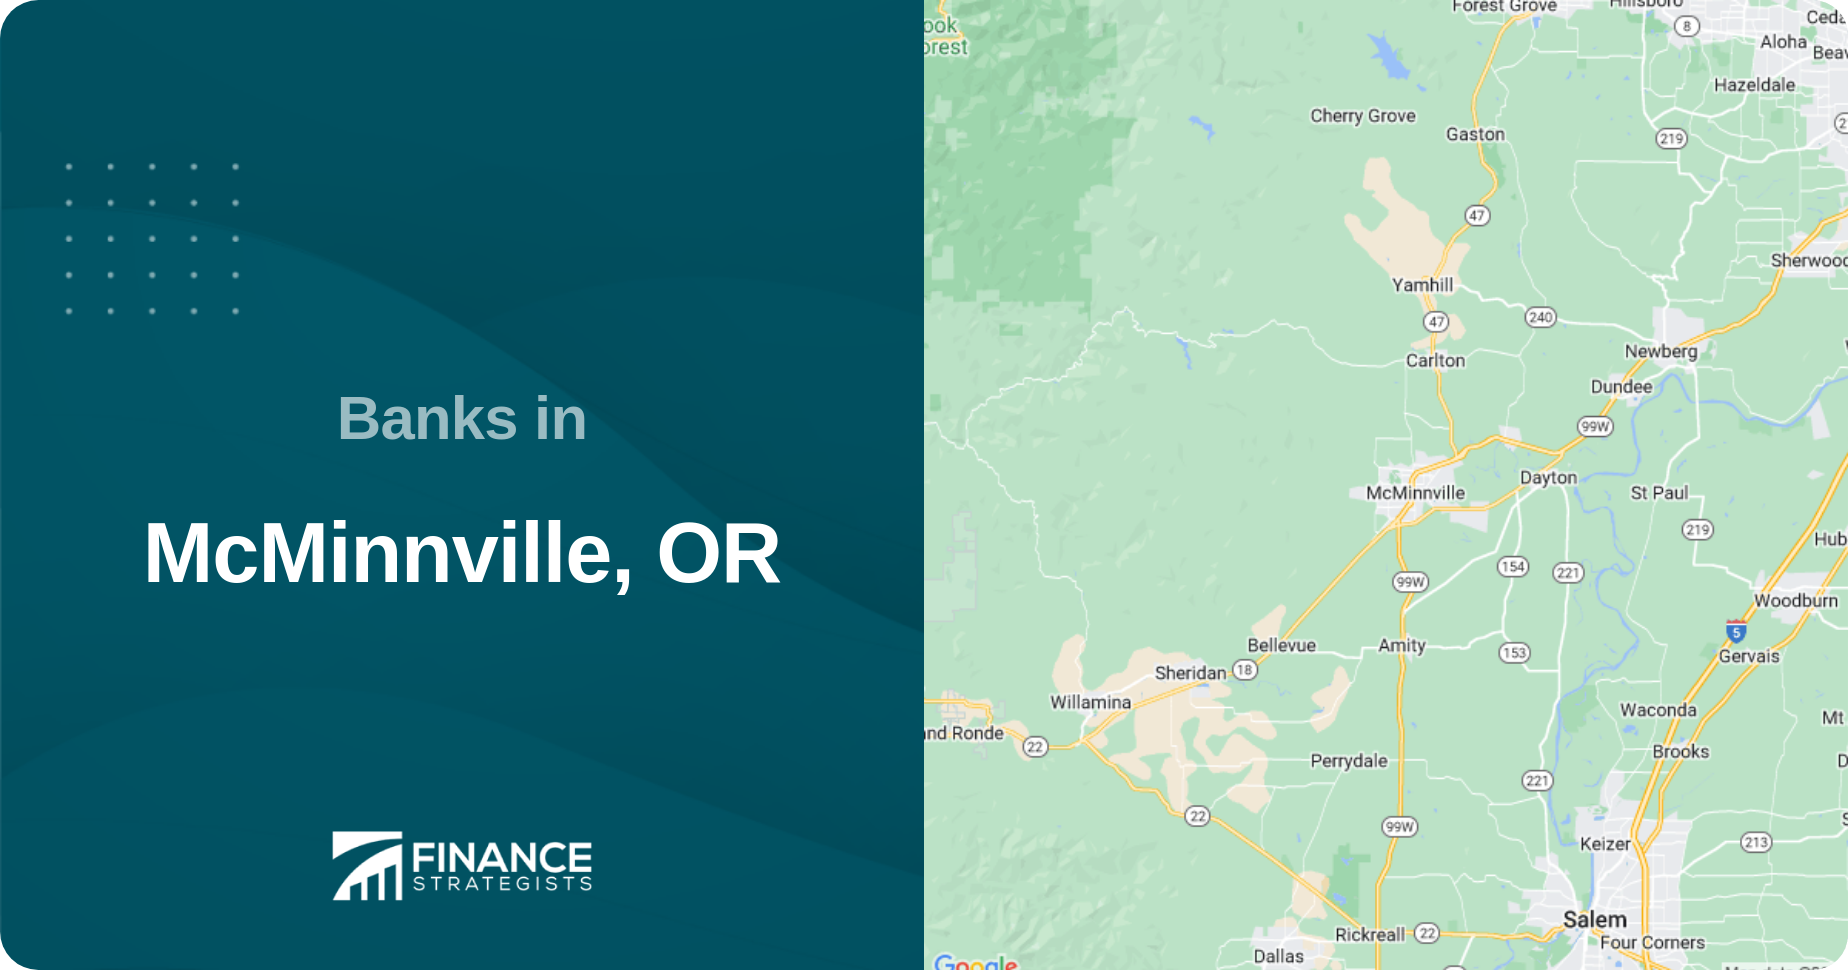 Banks in McMinnville, OR